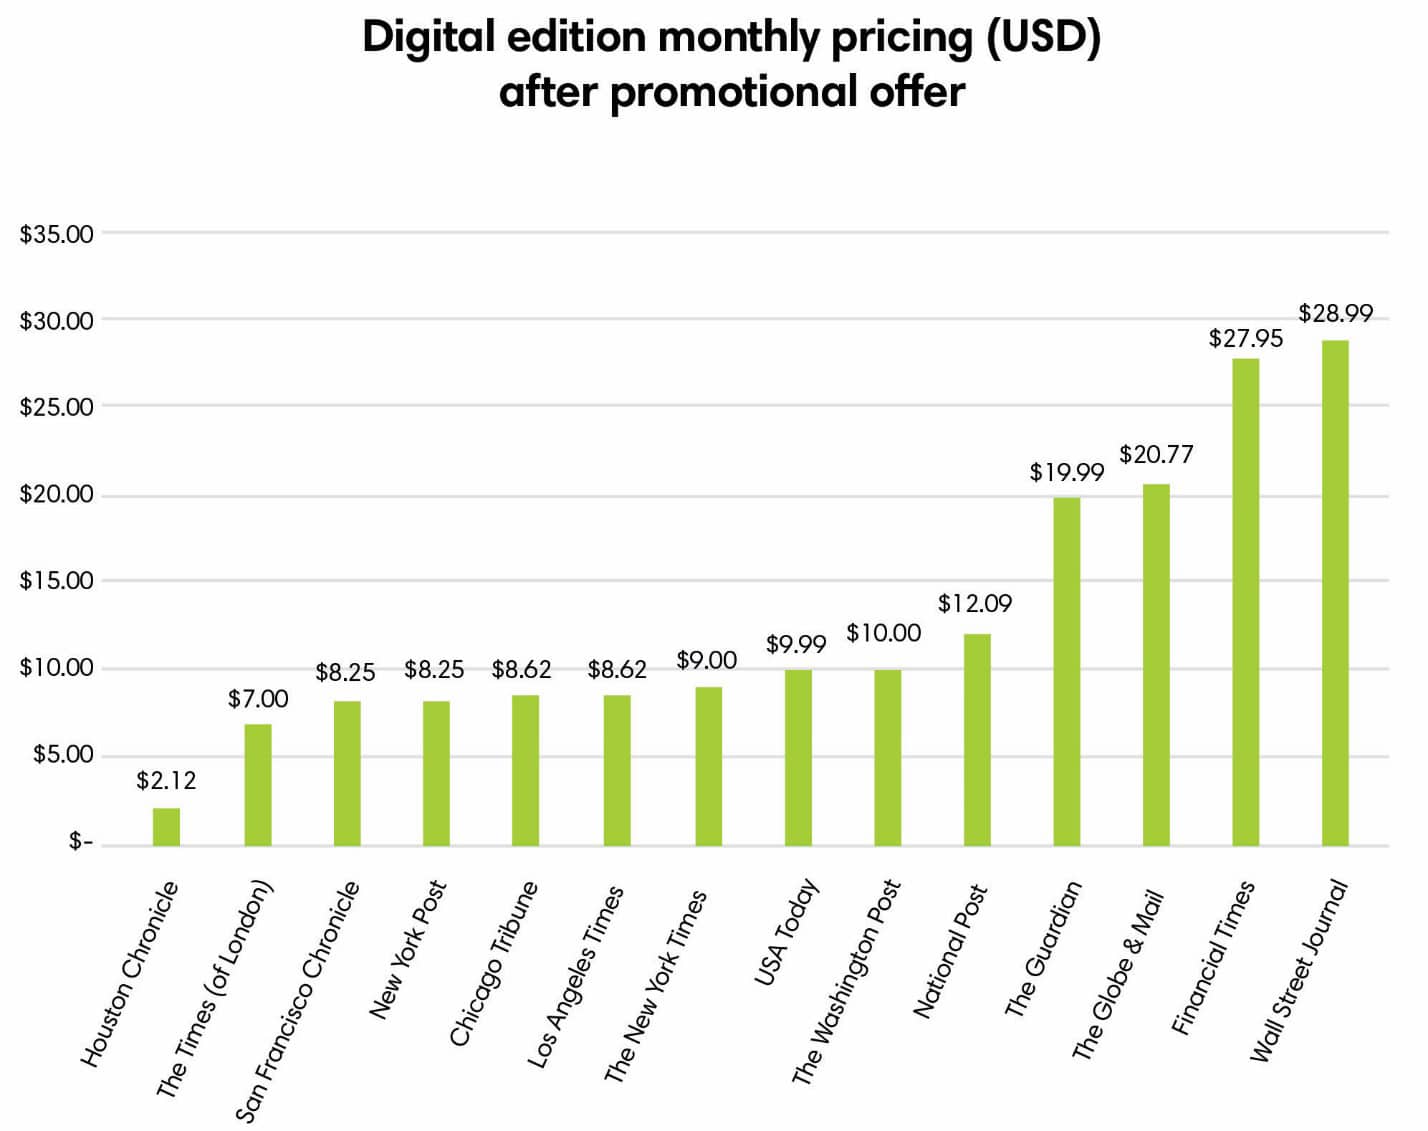 Digital edition monthly pricing after promotional offer